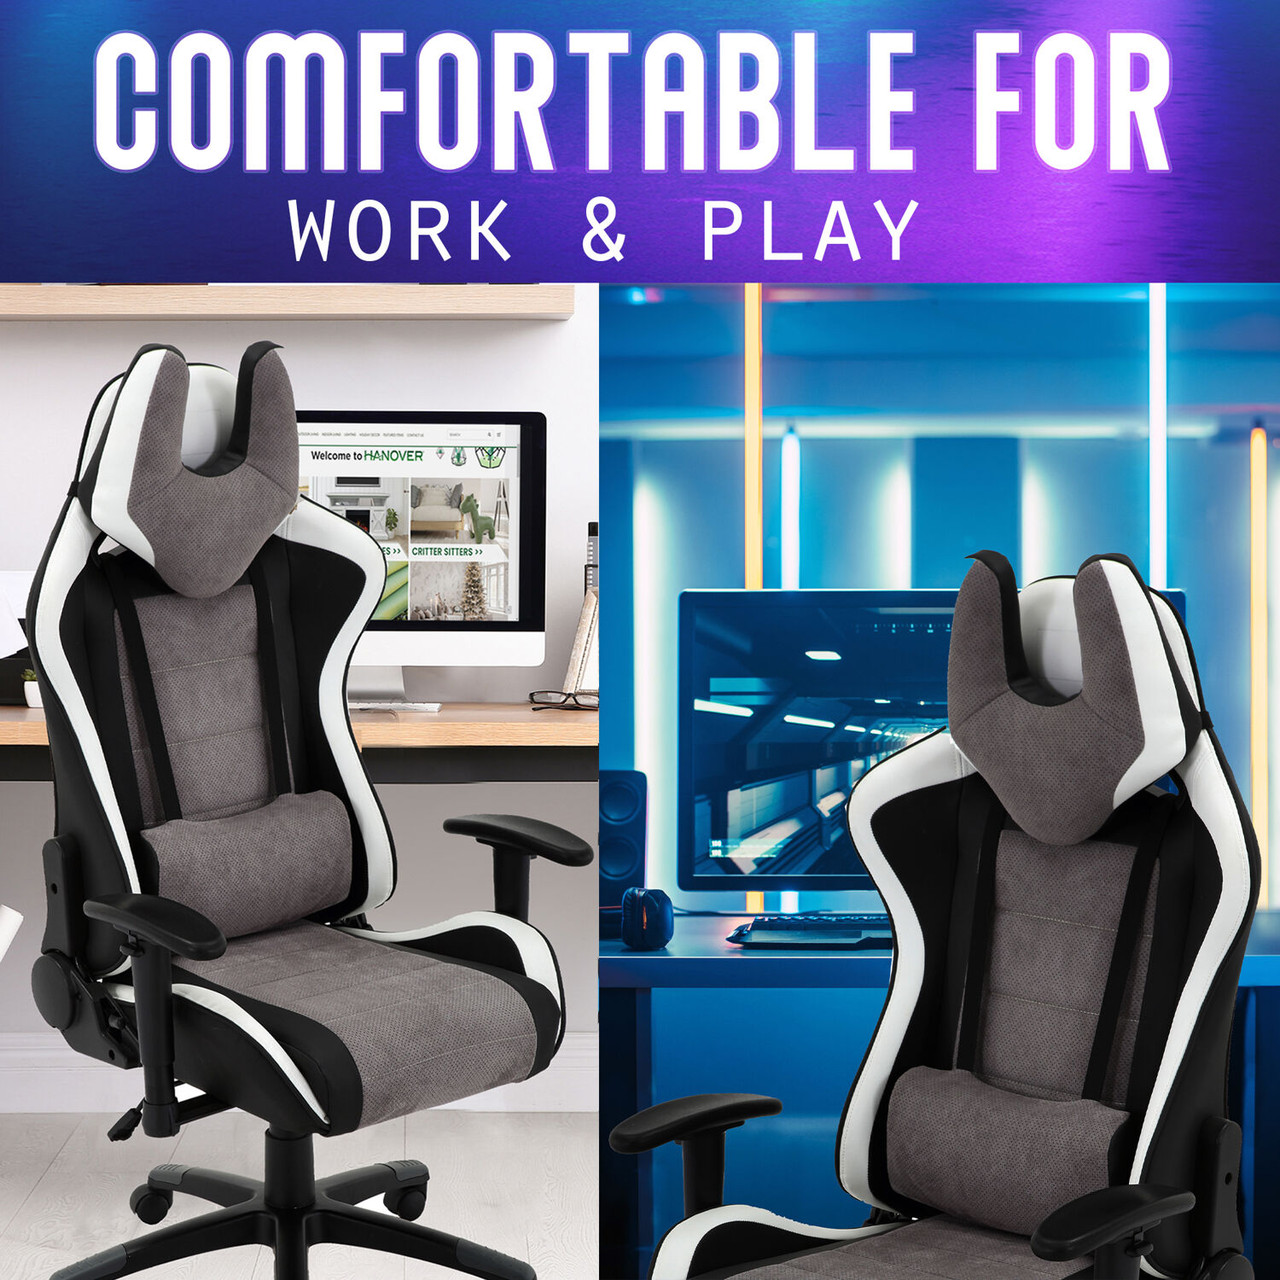 Hanover Commando Ergonomic Gaming Chair with Adjustable GAS Lift Seating Lumbar and Neck Support Black/Blue